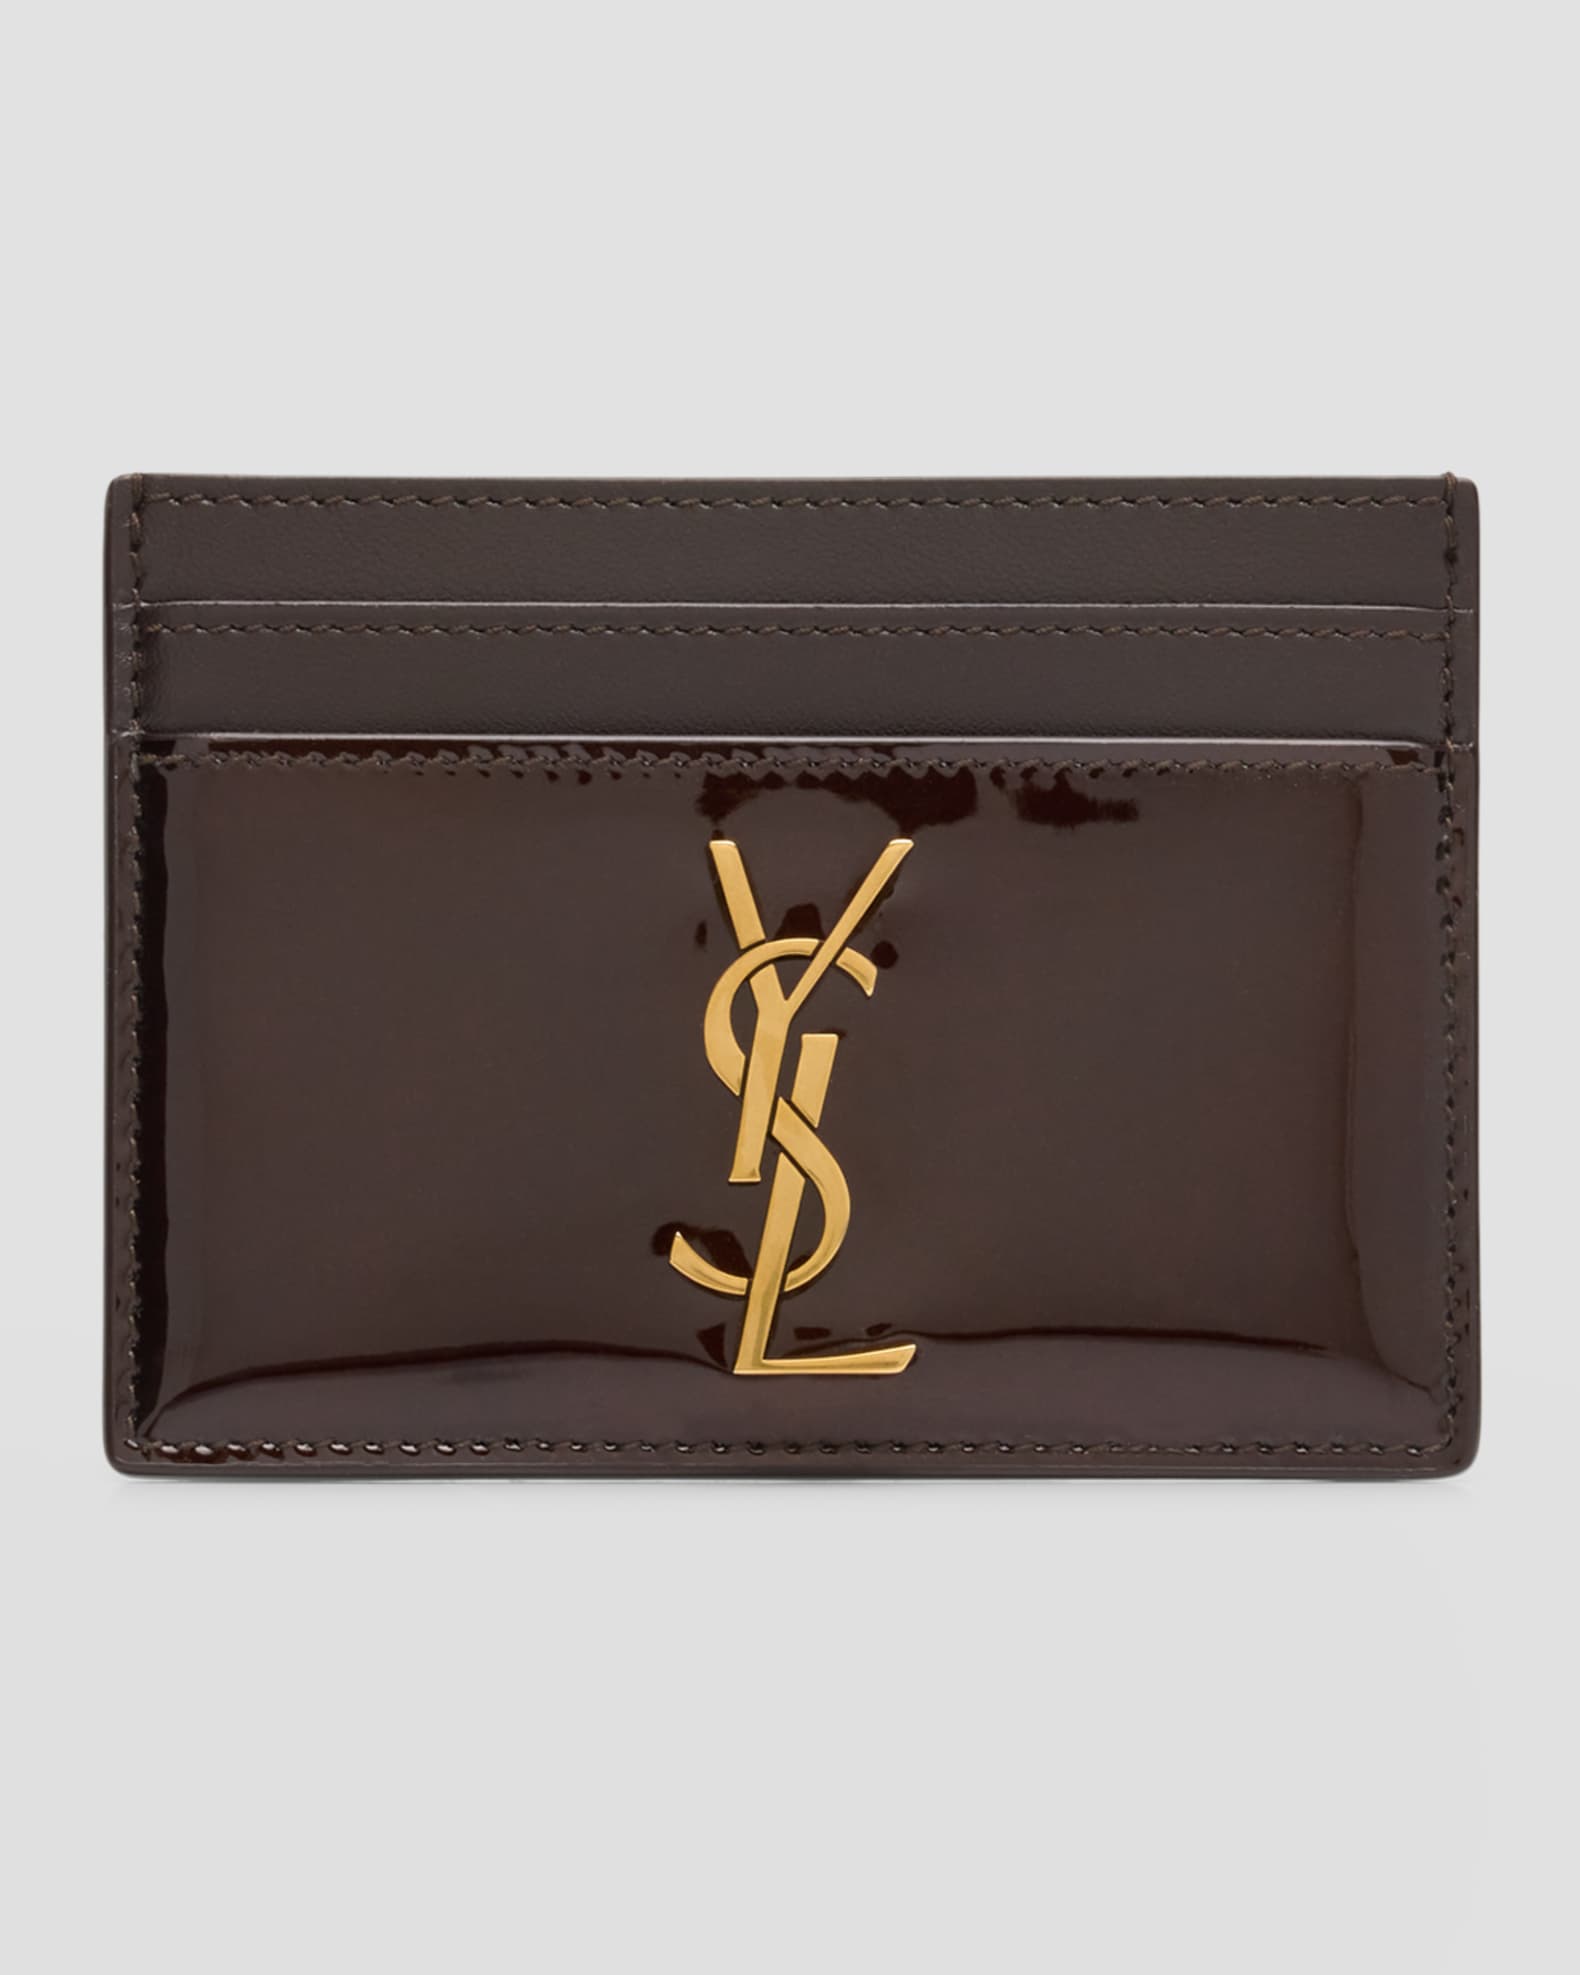 YSL Leather Card Holder | Neiman Marcus